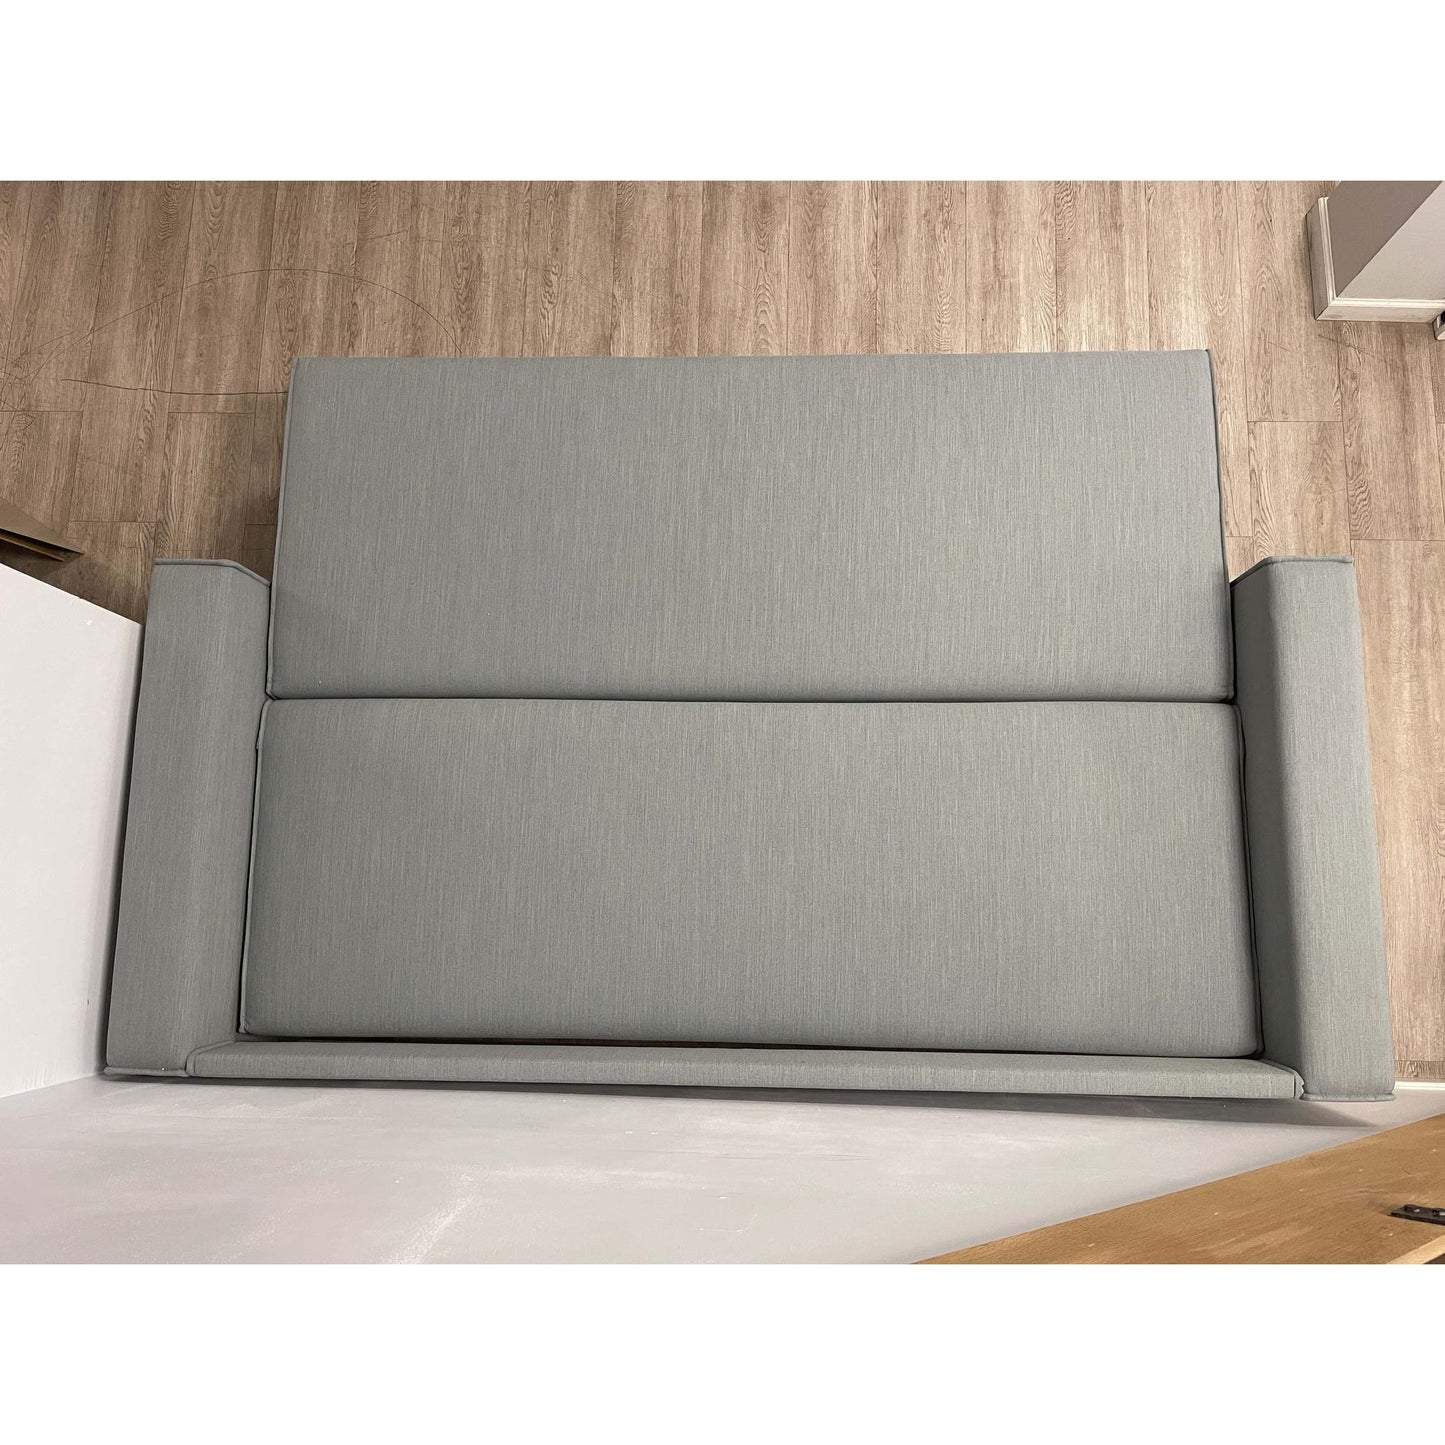 Country Modern Sofa Bed Sleeper in Marble